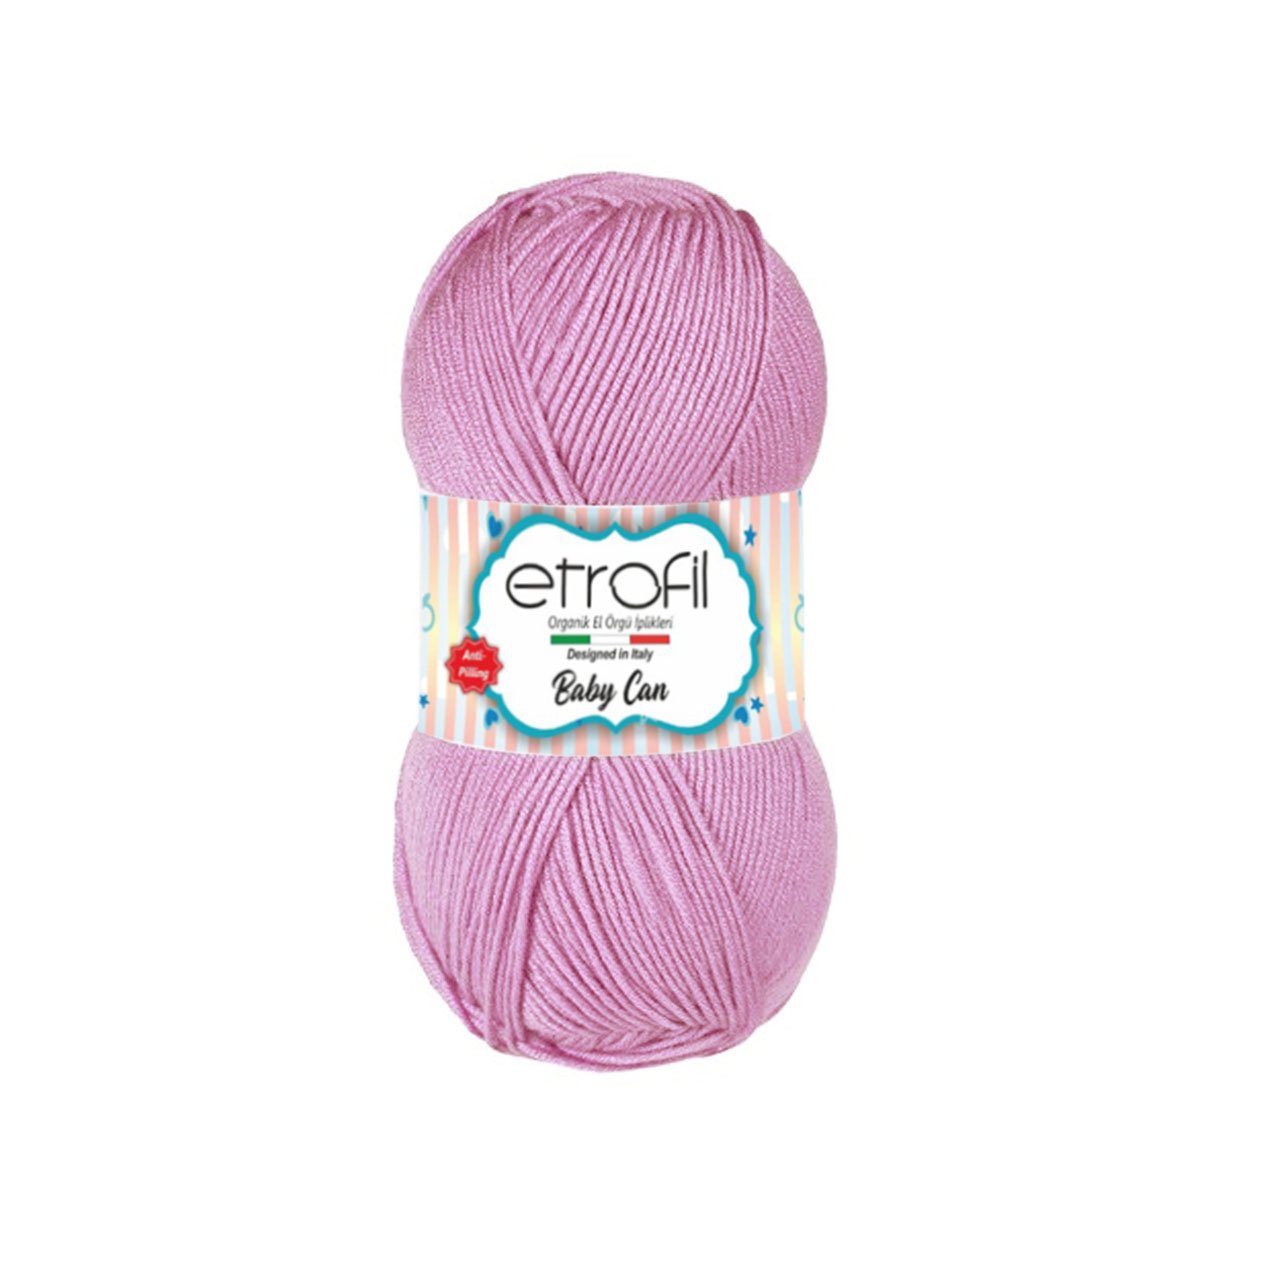 Etrofil Baby Can 80006